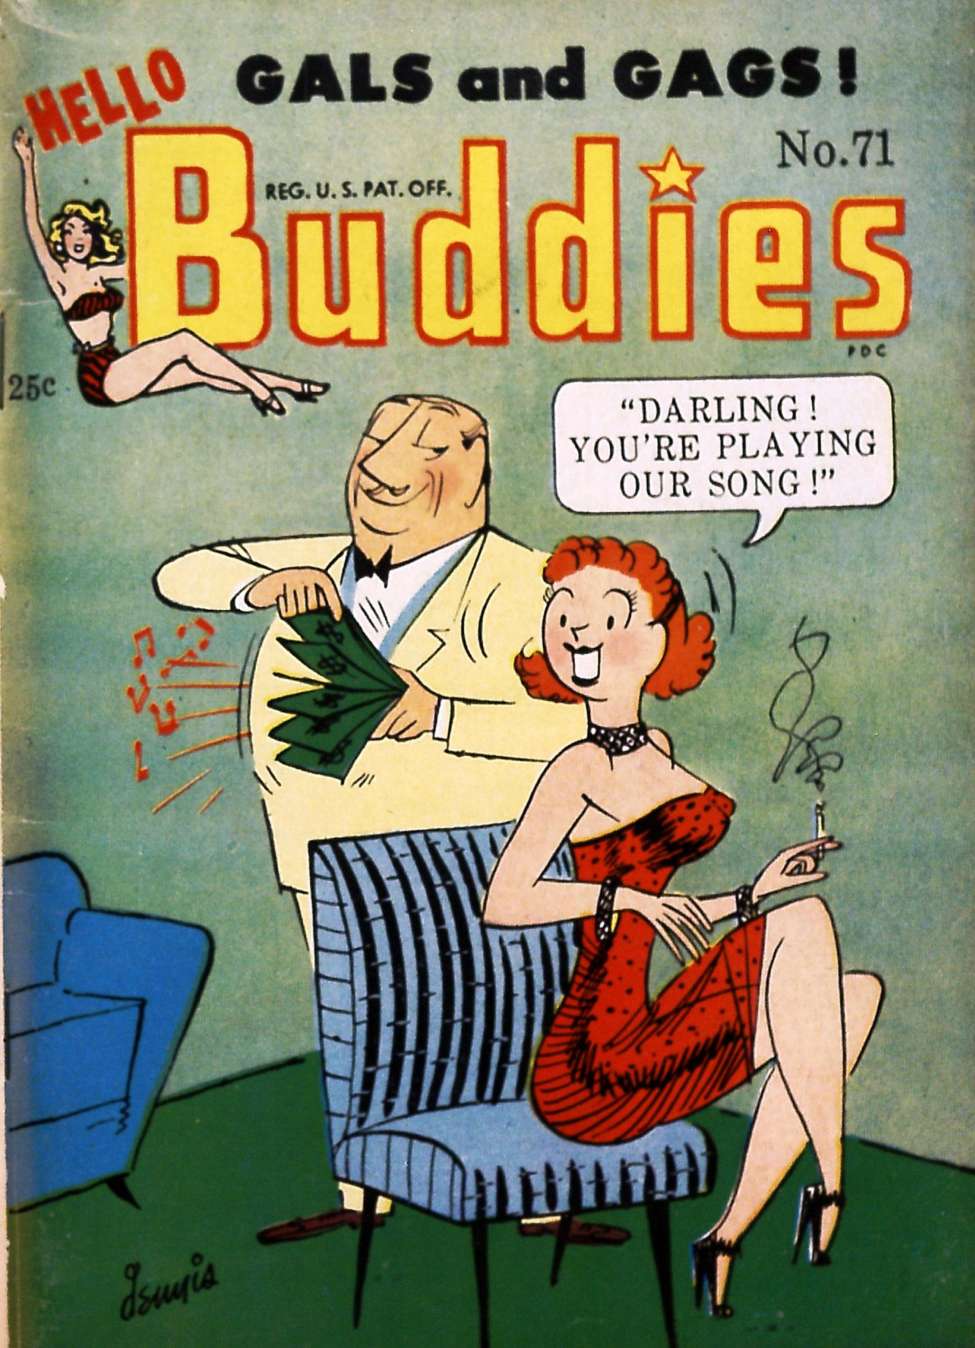 Book Cover For Hello Buddies 71